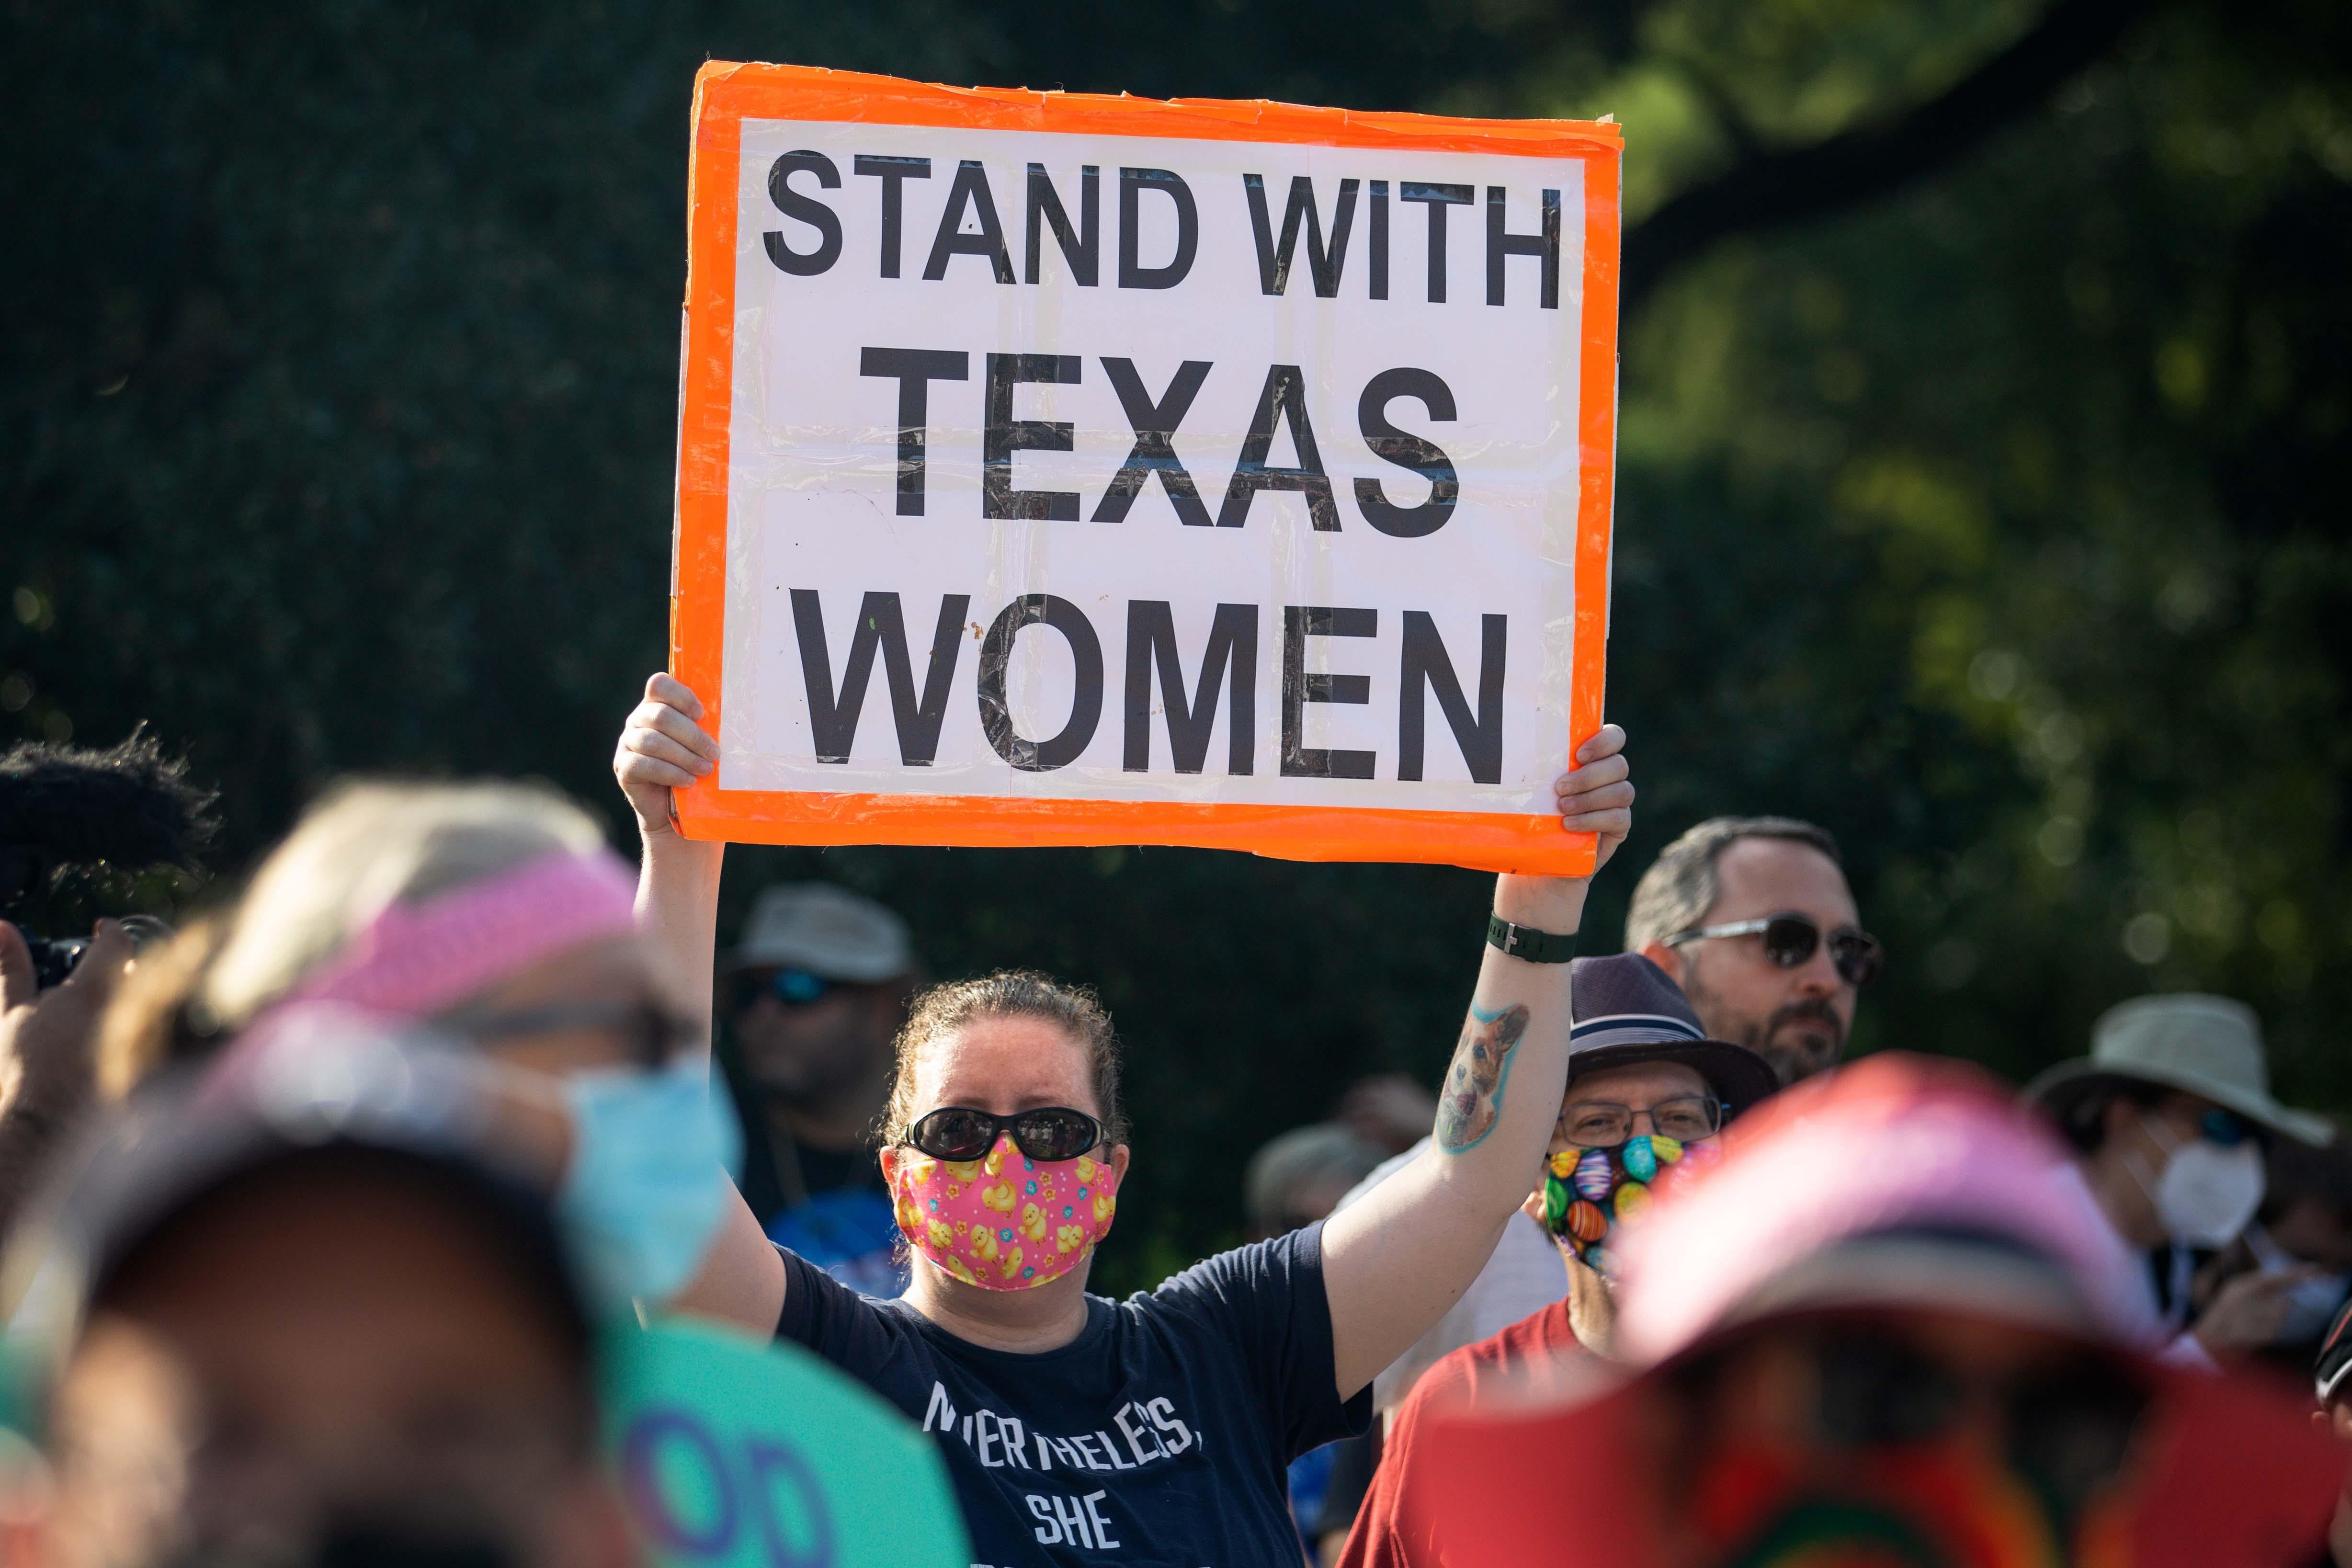 A protester in a crowd holds up a sign that says, "STAND WITH TEXAS WOMEN."